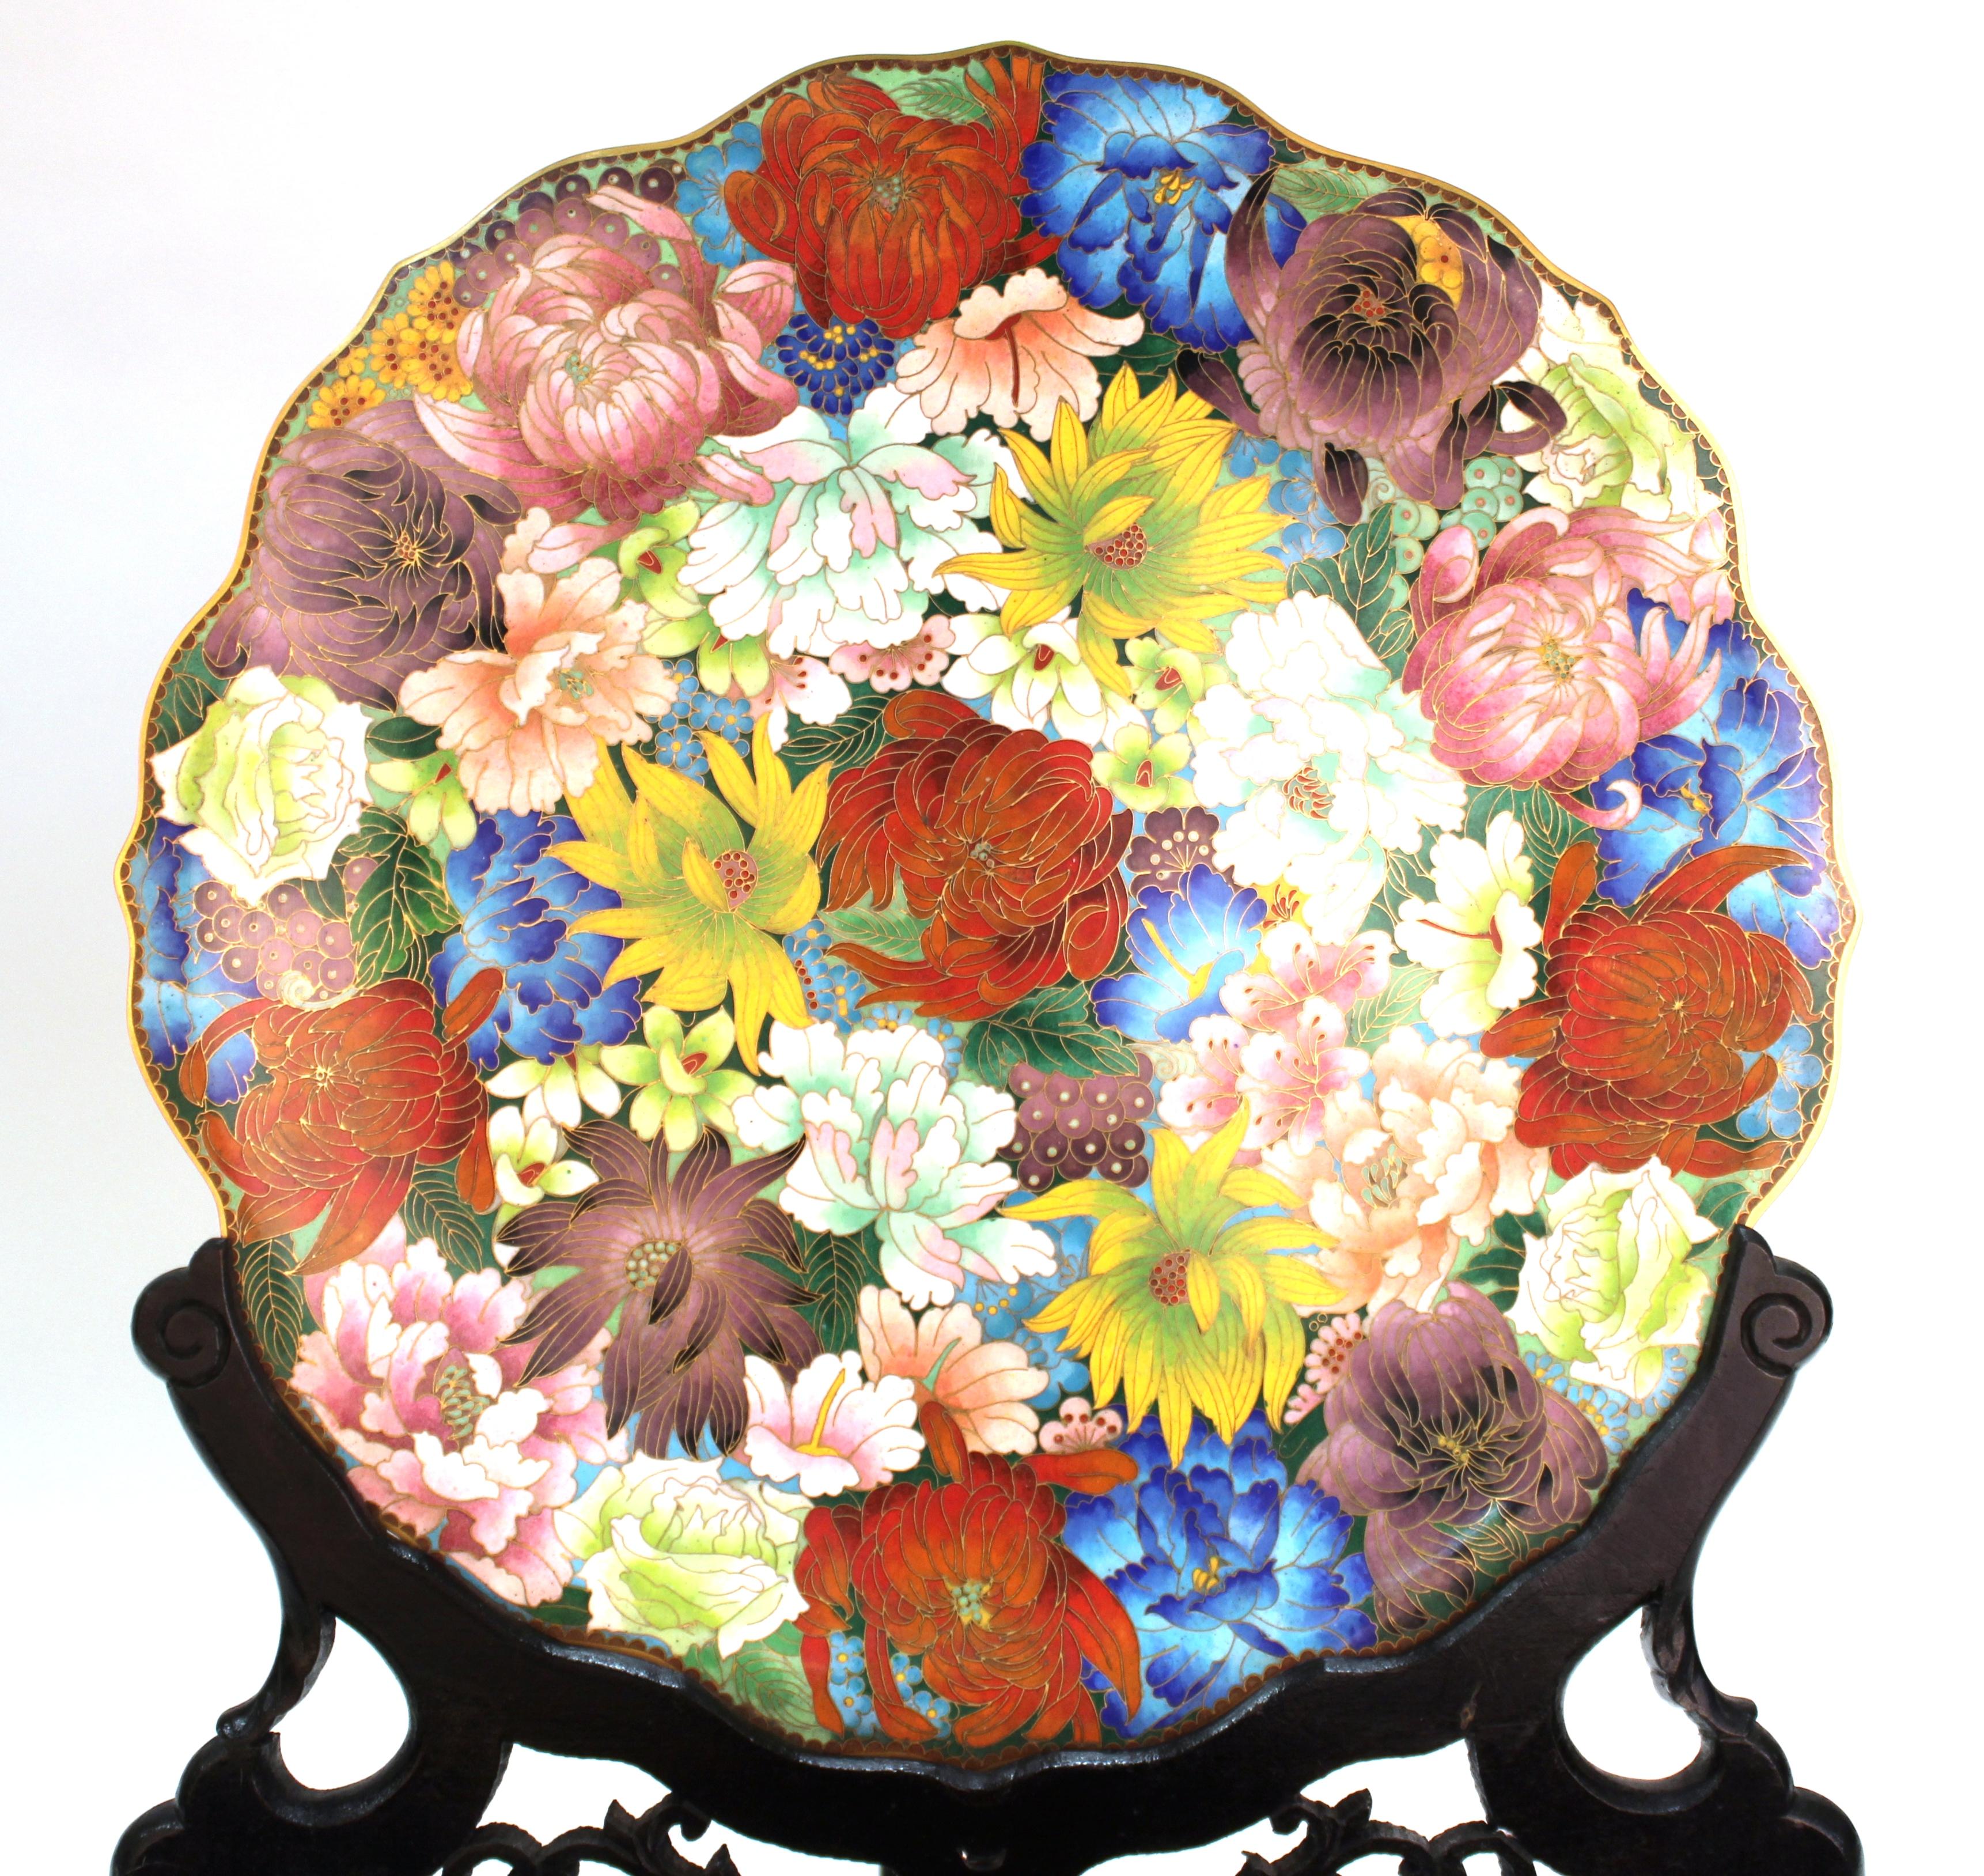 Chinese metal cloisonné charger with multicolored floral motif on the front face and a blue enamel back with stylized floral motif. The piece was made in circa 1930 and comes with a carved ebonized wooden stand.